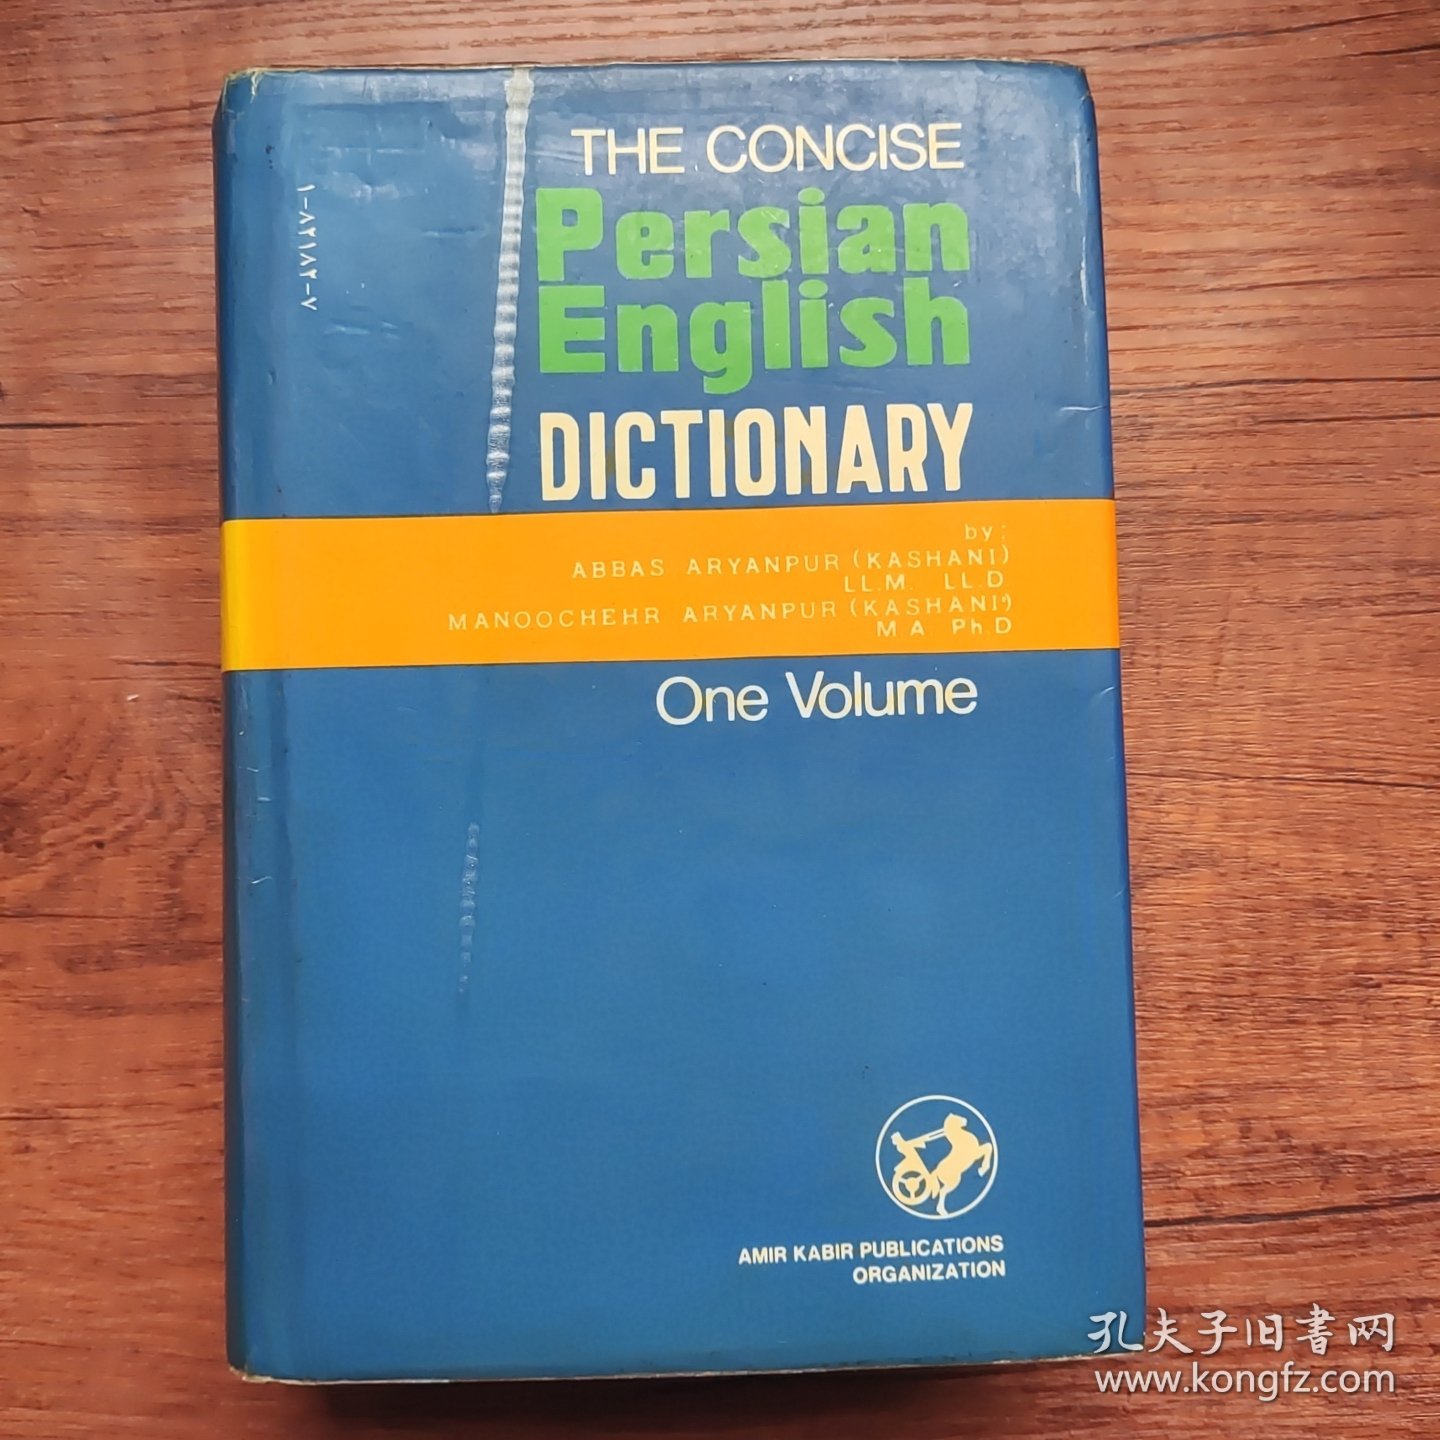 The Concise Persian-English Dictionary （One Volume）（波斯语-英语 词典）